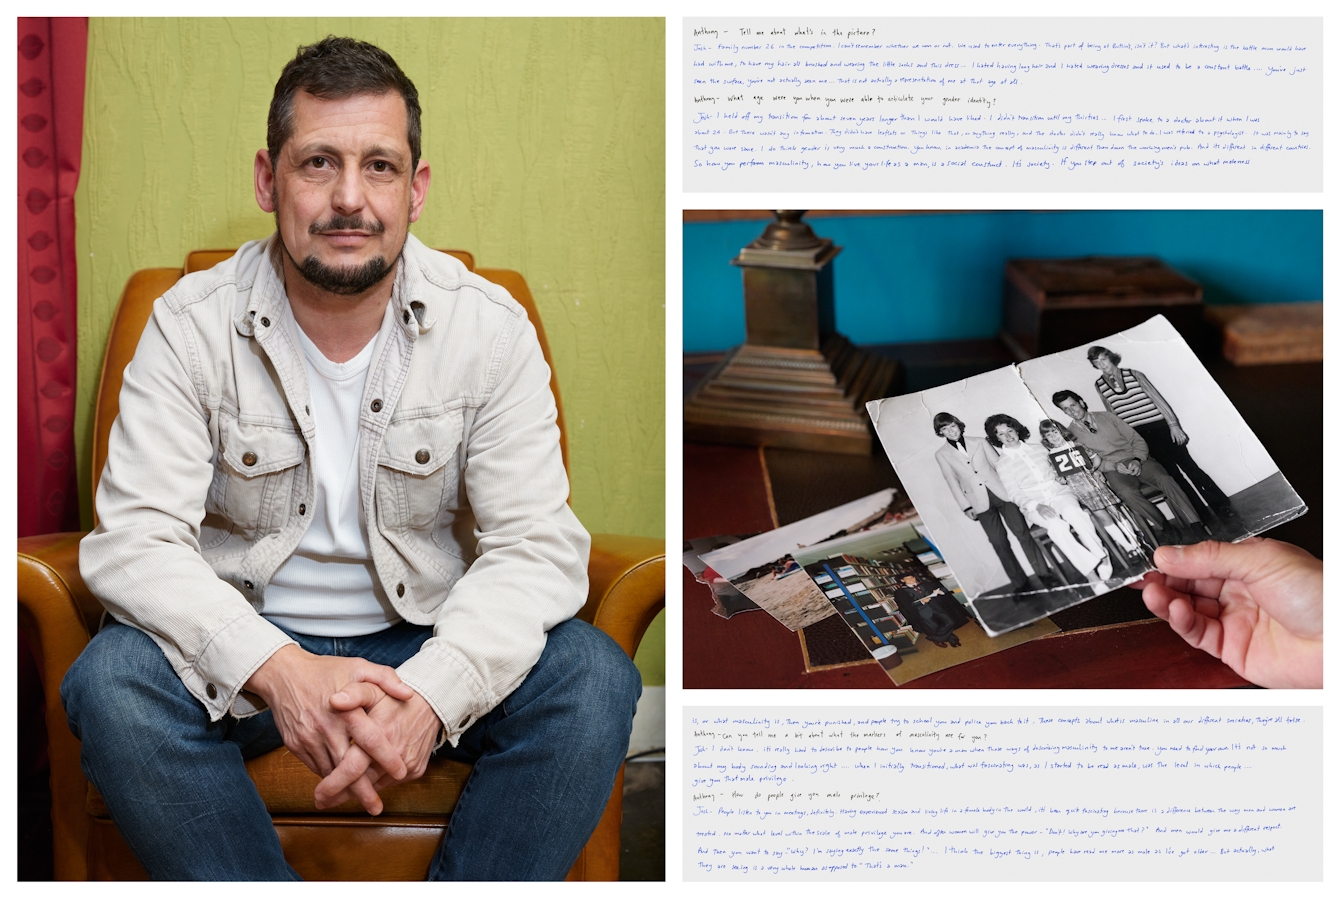 Photograph of an individual sat in an armchair. They are looking straight to camera and behind them the wall is green in colour. To the right of this photograph is another photograph showing two hands holding a family photo album showing an empty page. Above and below this image are images of handwritten texts.